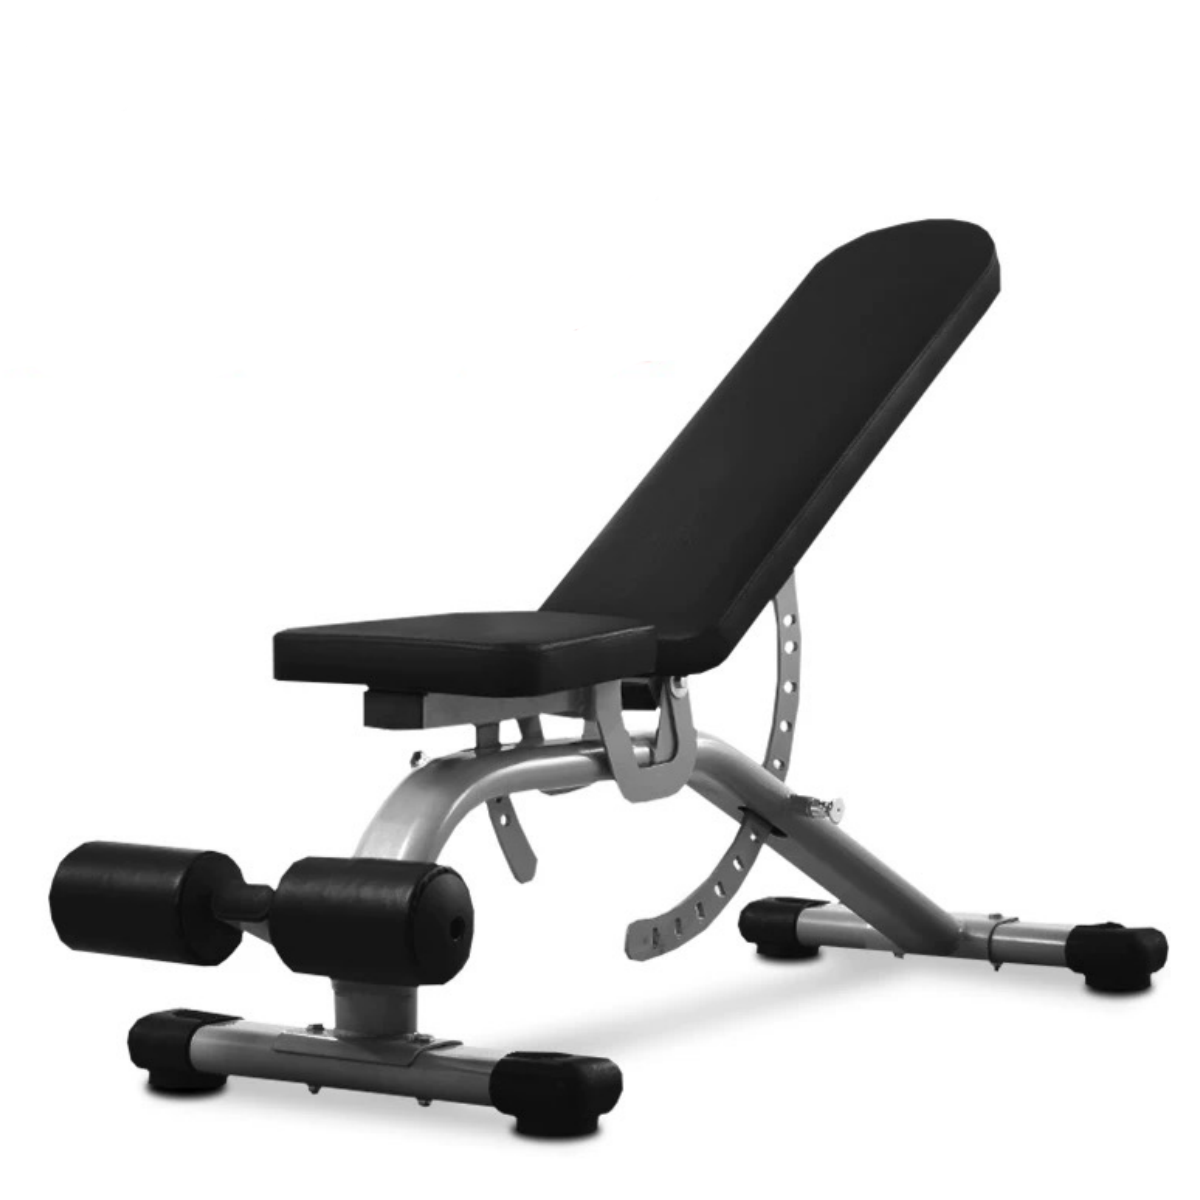 Weight Bench | Heavy Duty Adjustable Bench